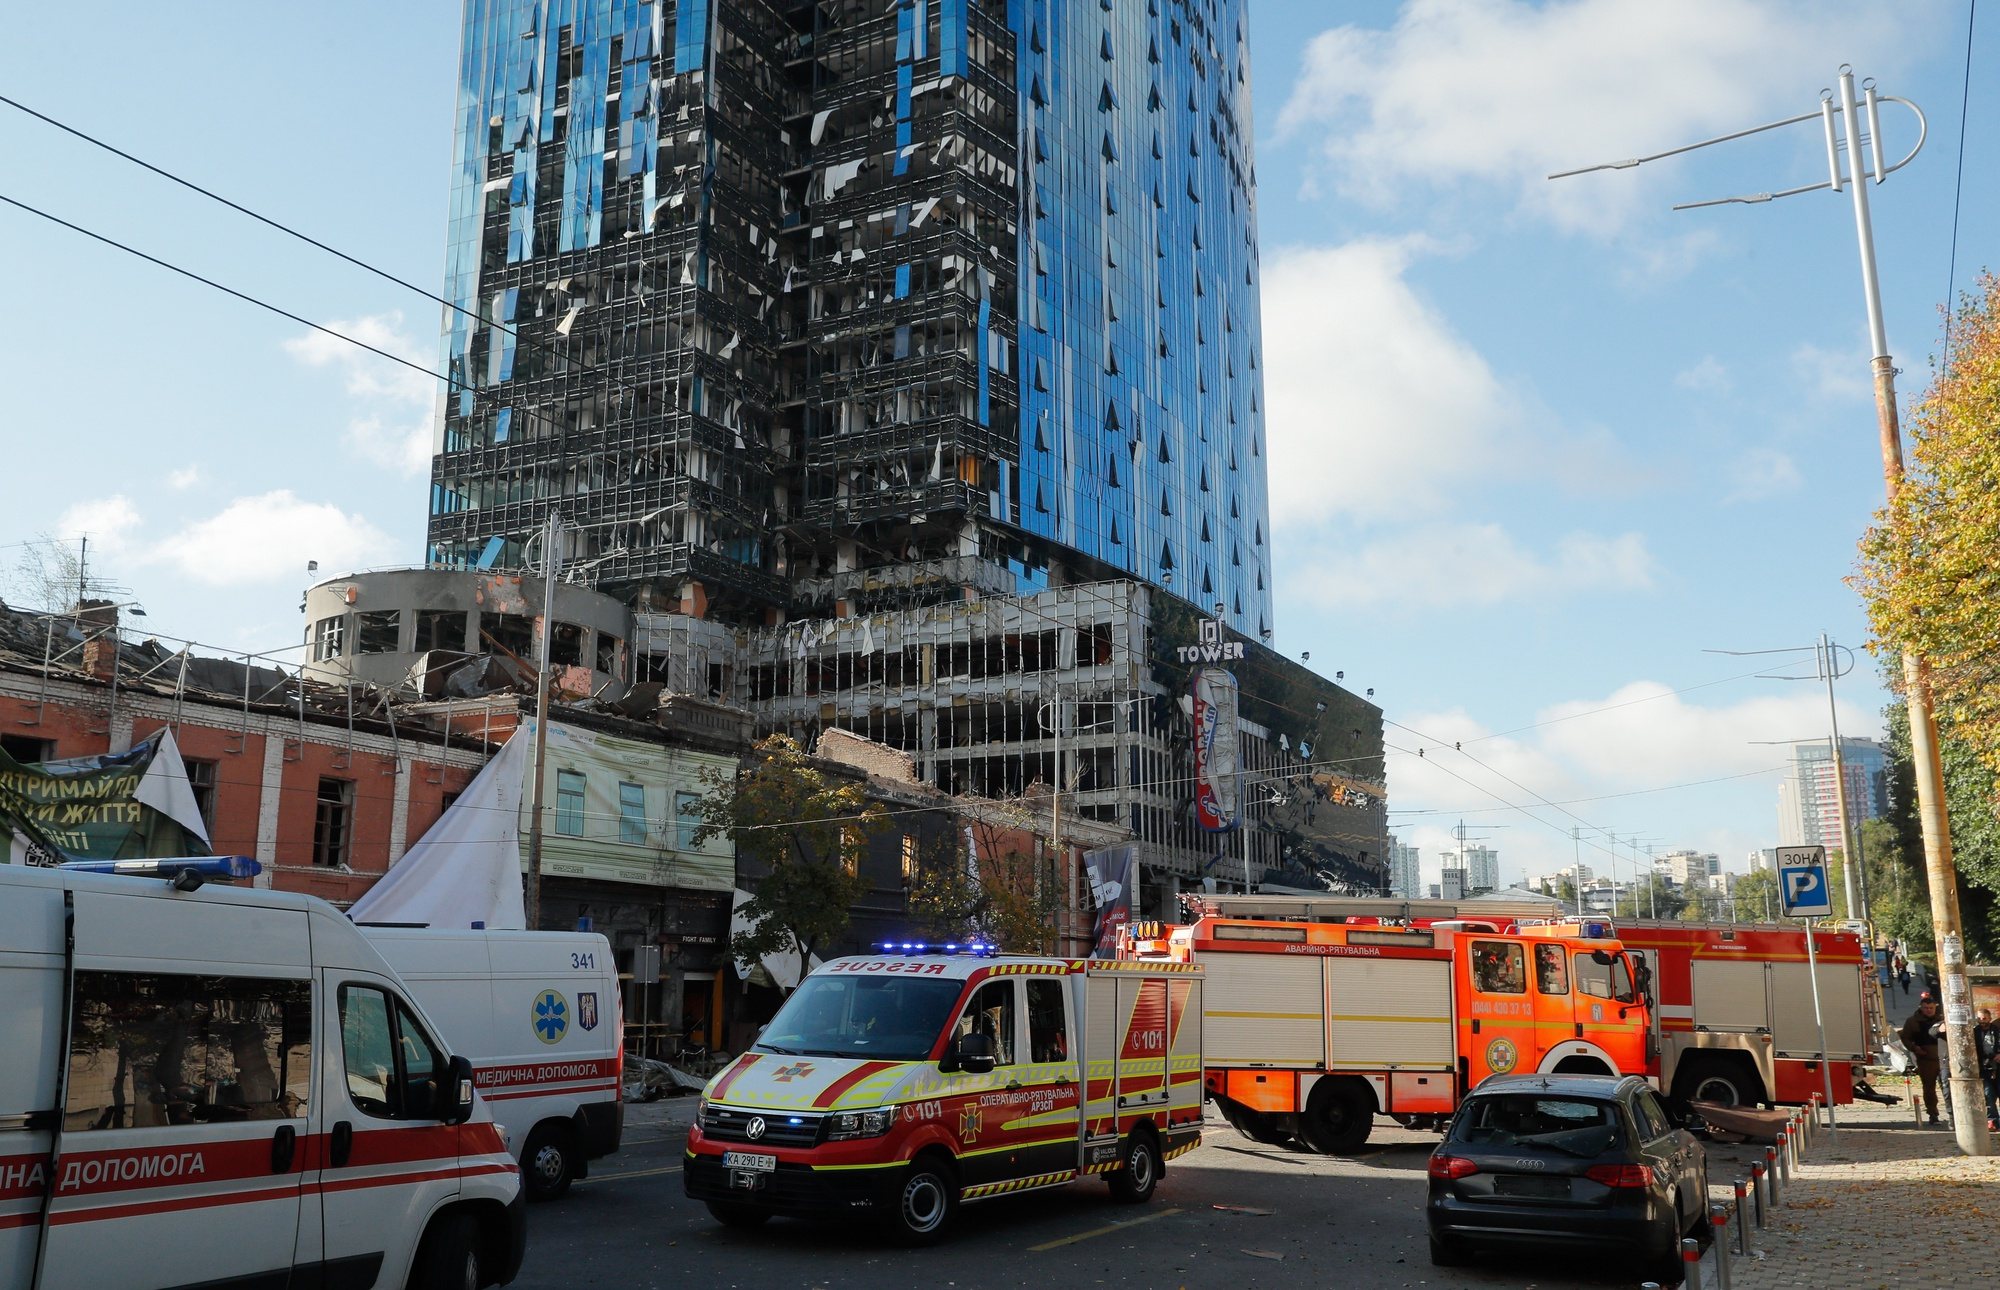 epa10234216 Emergency services gather near a site hit by shelling in downtown Kyiv (Kiev), Ukraine, 10 October 2022. Explosions have been reported in several districts of the Ukrainian capital Kyiv on 10 October, with rescuers extinguishing fires and helping the victims among the civilian population, the State Emergency Service (SES) of Ukraine said. Russian troops entered Ukraine on 24 February 2022 starting a conflict that has provoked destruction and a humanitarian crisis.  EPA/SERGEY DOLZHENKO